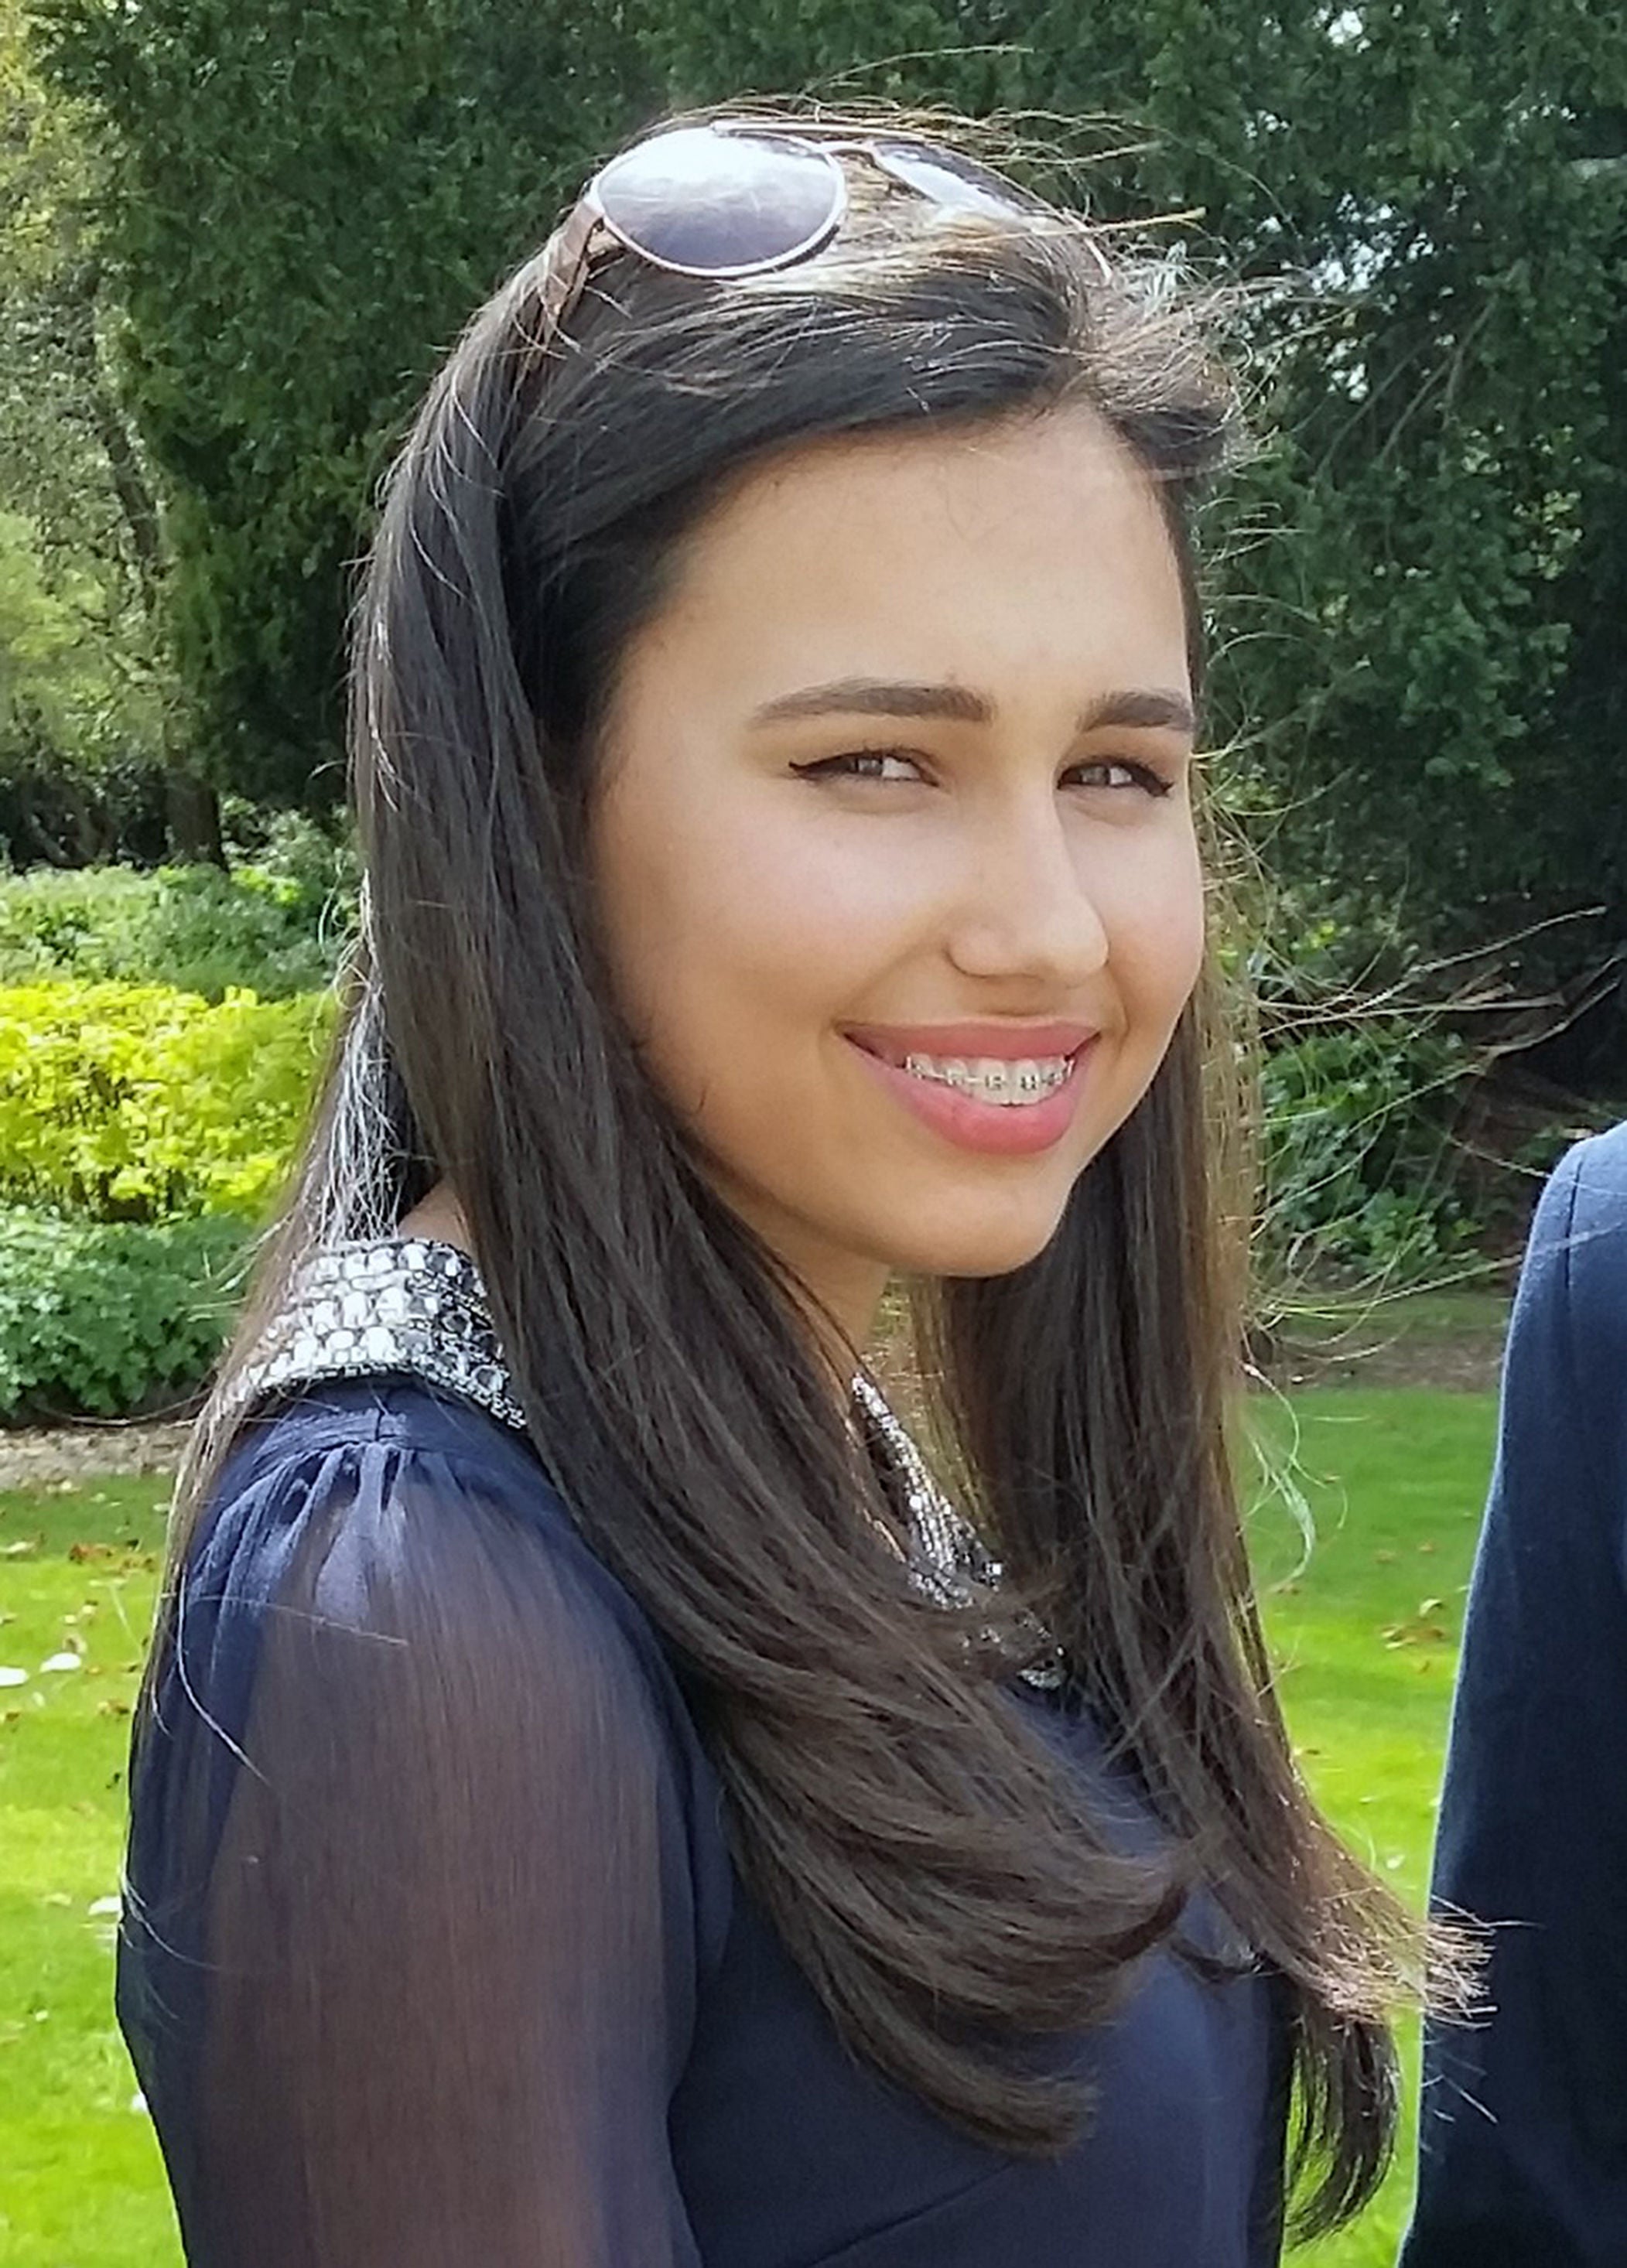 Natasha Ednan-Laperouse died after falling ill on a flight from London to Nice